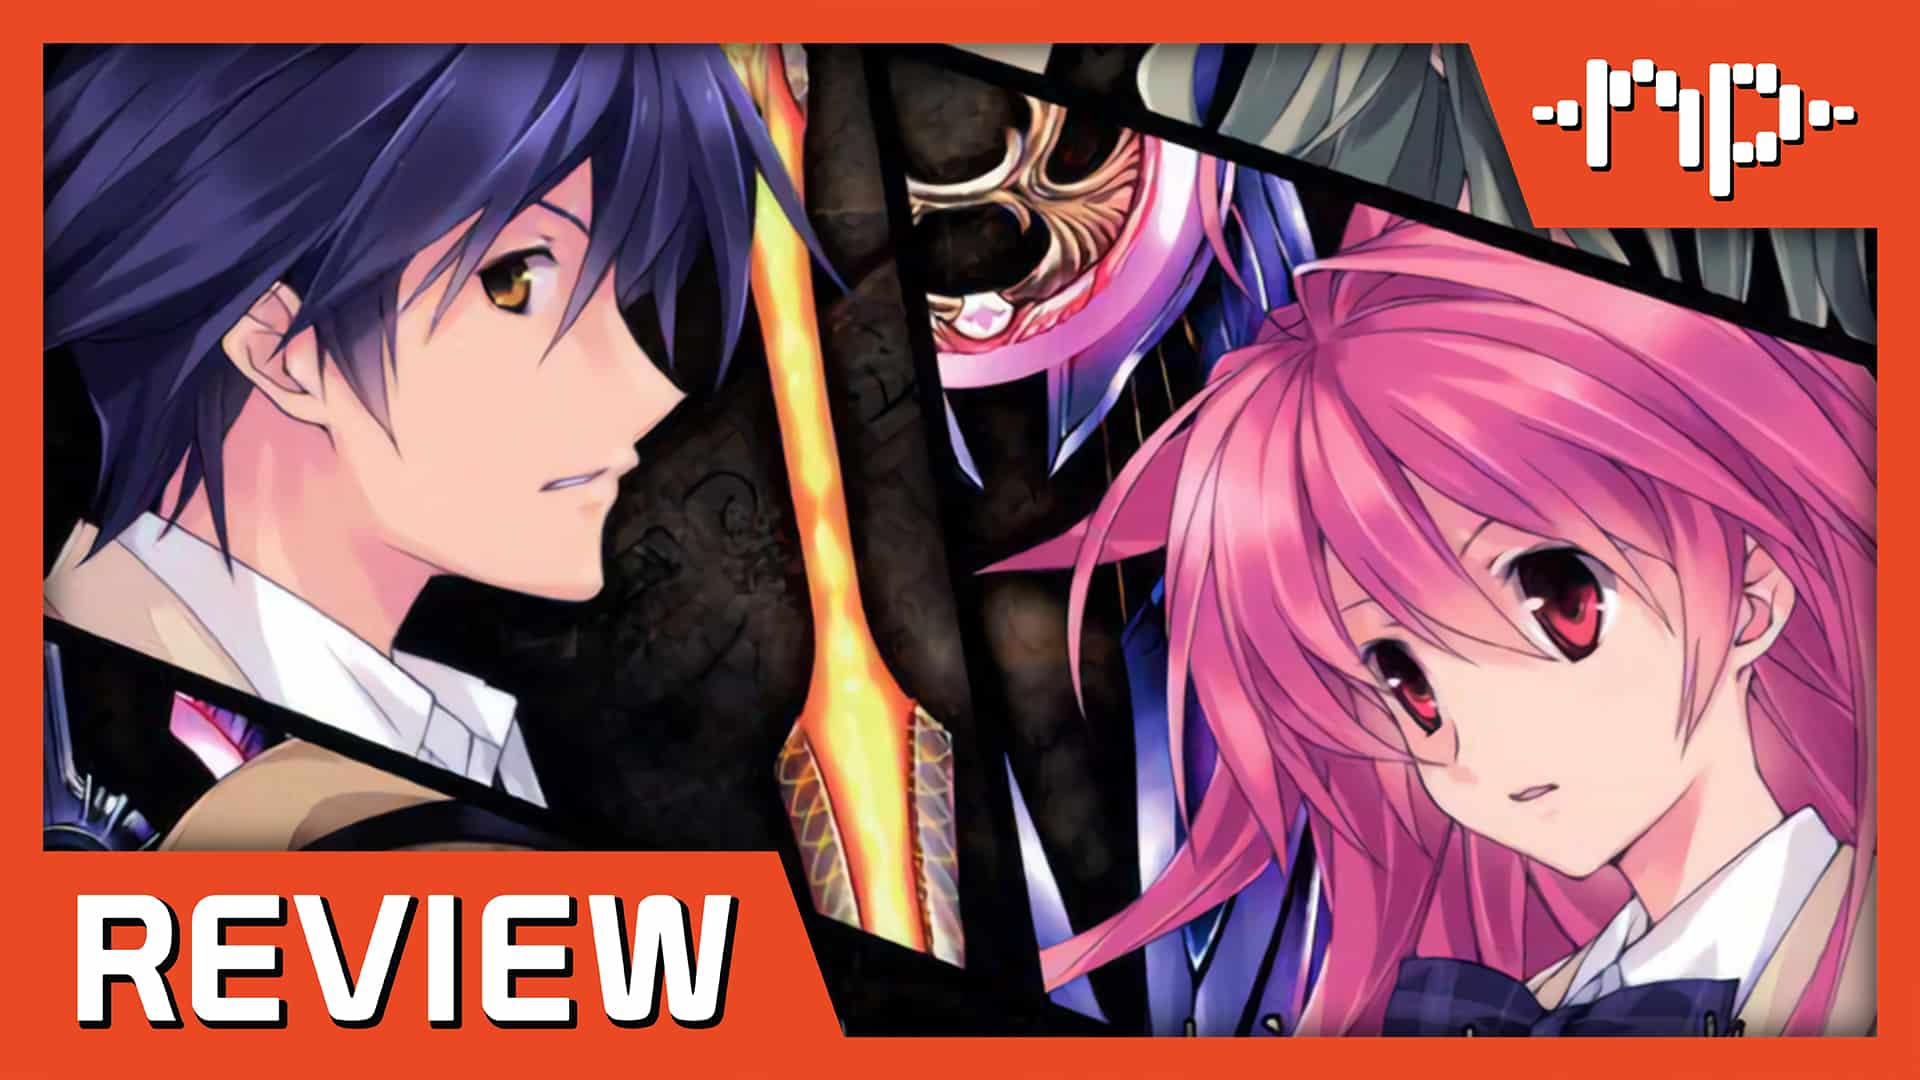 Chaos;Head Noah Review – “My” Eyes Are Not “Those” Eyes